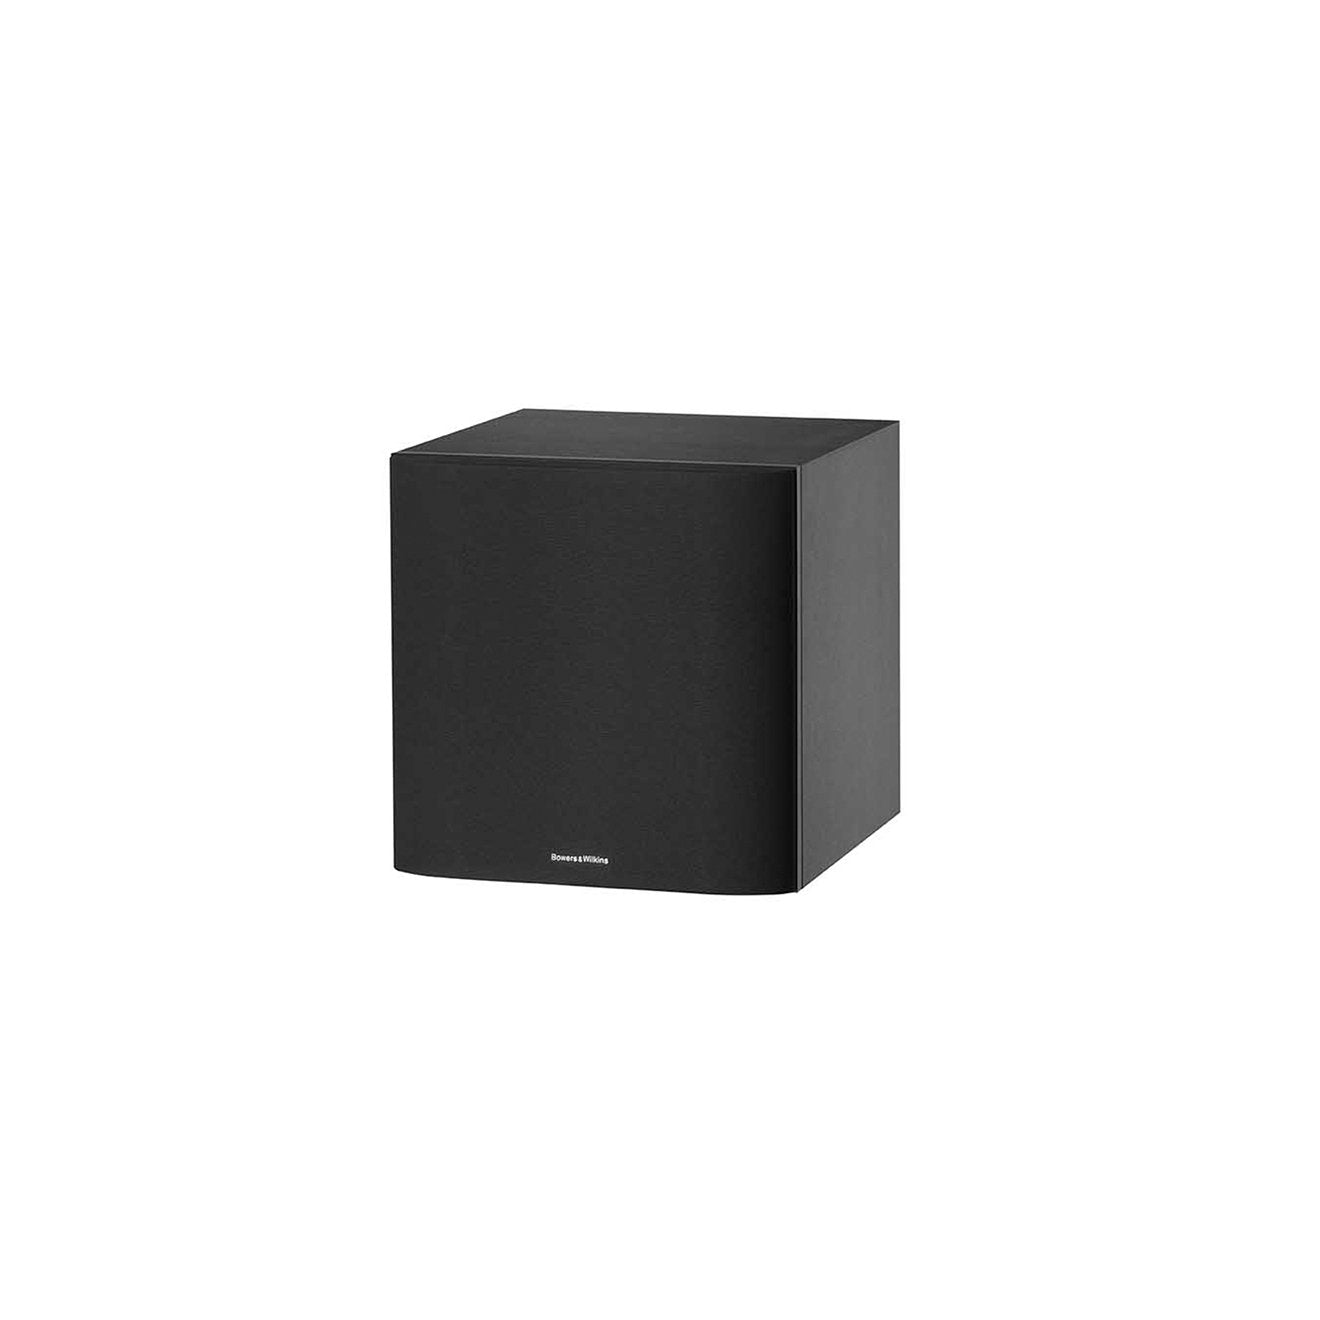 Bowers & Wilkins ASW 610XP Anniversary Edition now available at Qubix Technologies, Bangalore, India. Bowers & Wilkins Products Available for Purchase at Qubix Technologies, Bangalore. Home Theaters Available for Purchase at Qubix Technologies, Bangalore